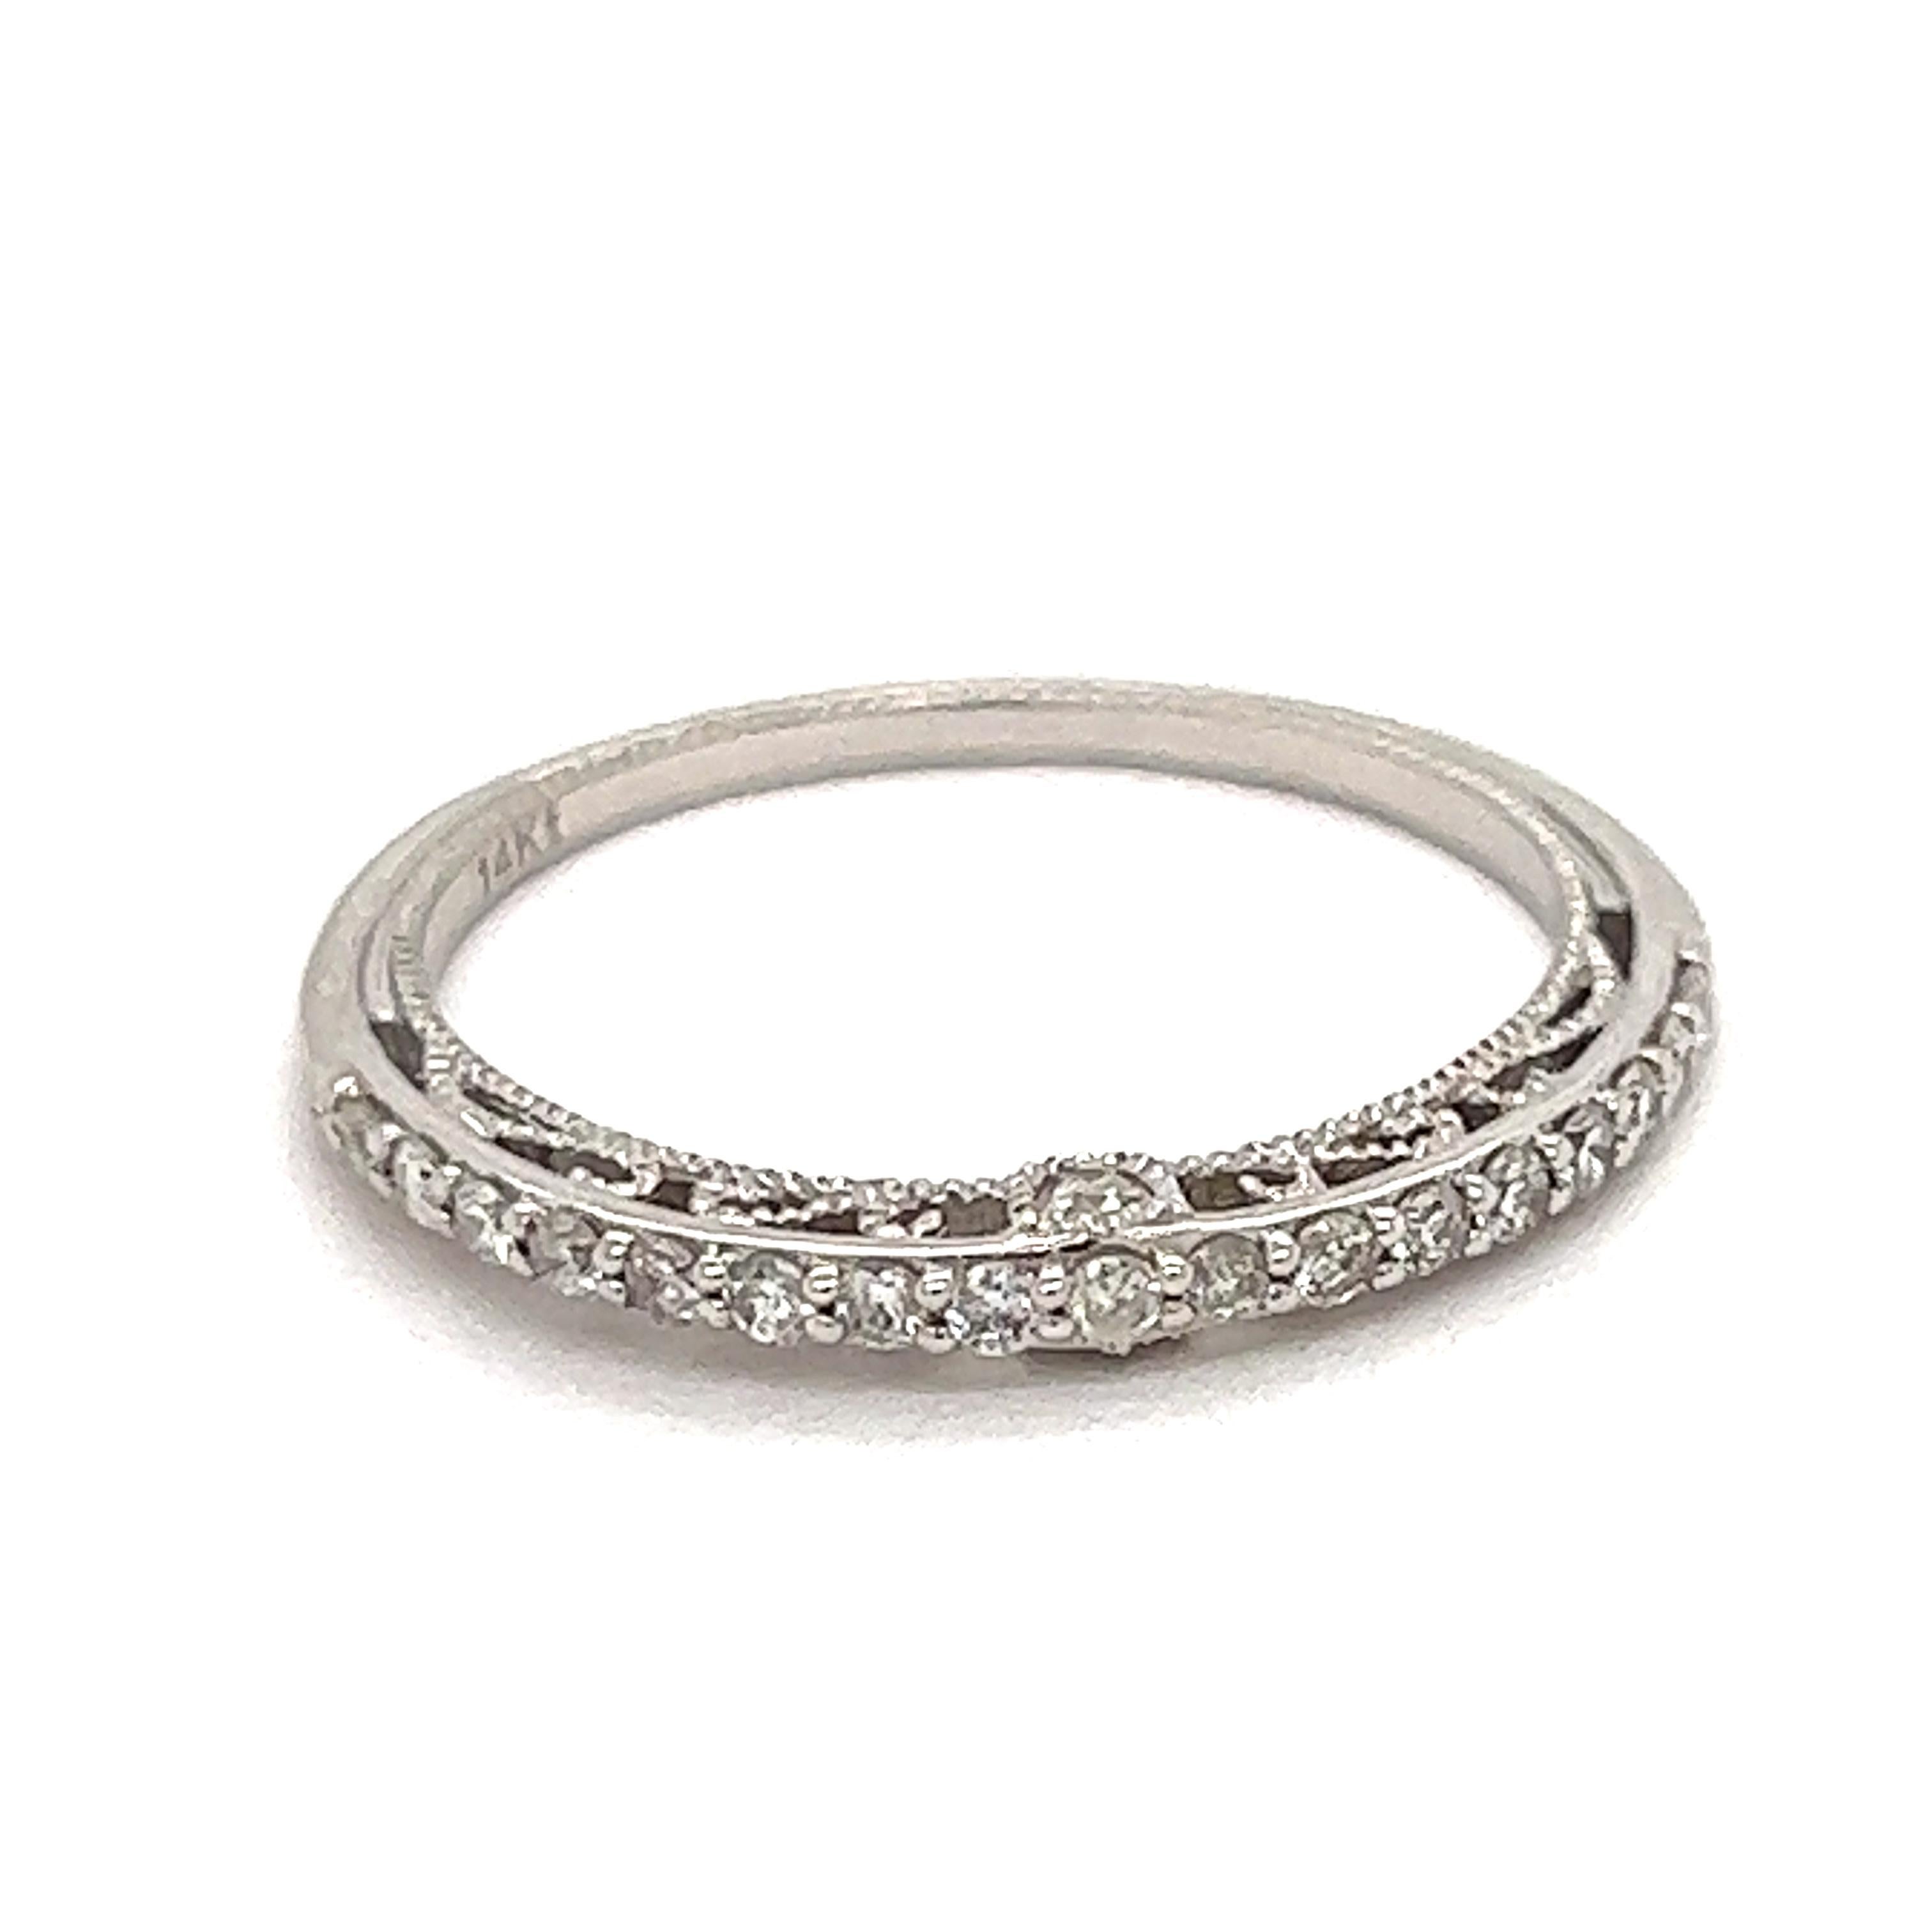 This delicate diamond band is intricately designed with beautiful filigree and milgrain finish.  With .25 cttw in SI clarity, G-H color diamonds and 1.85 grams of 14 Kt white gold.  Perfect to wear as a wedding band, or stack. 

This ring is sold as